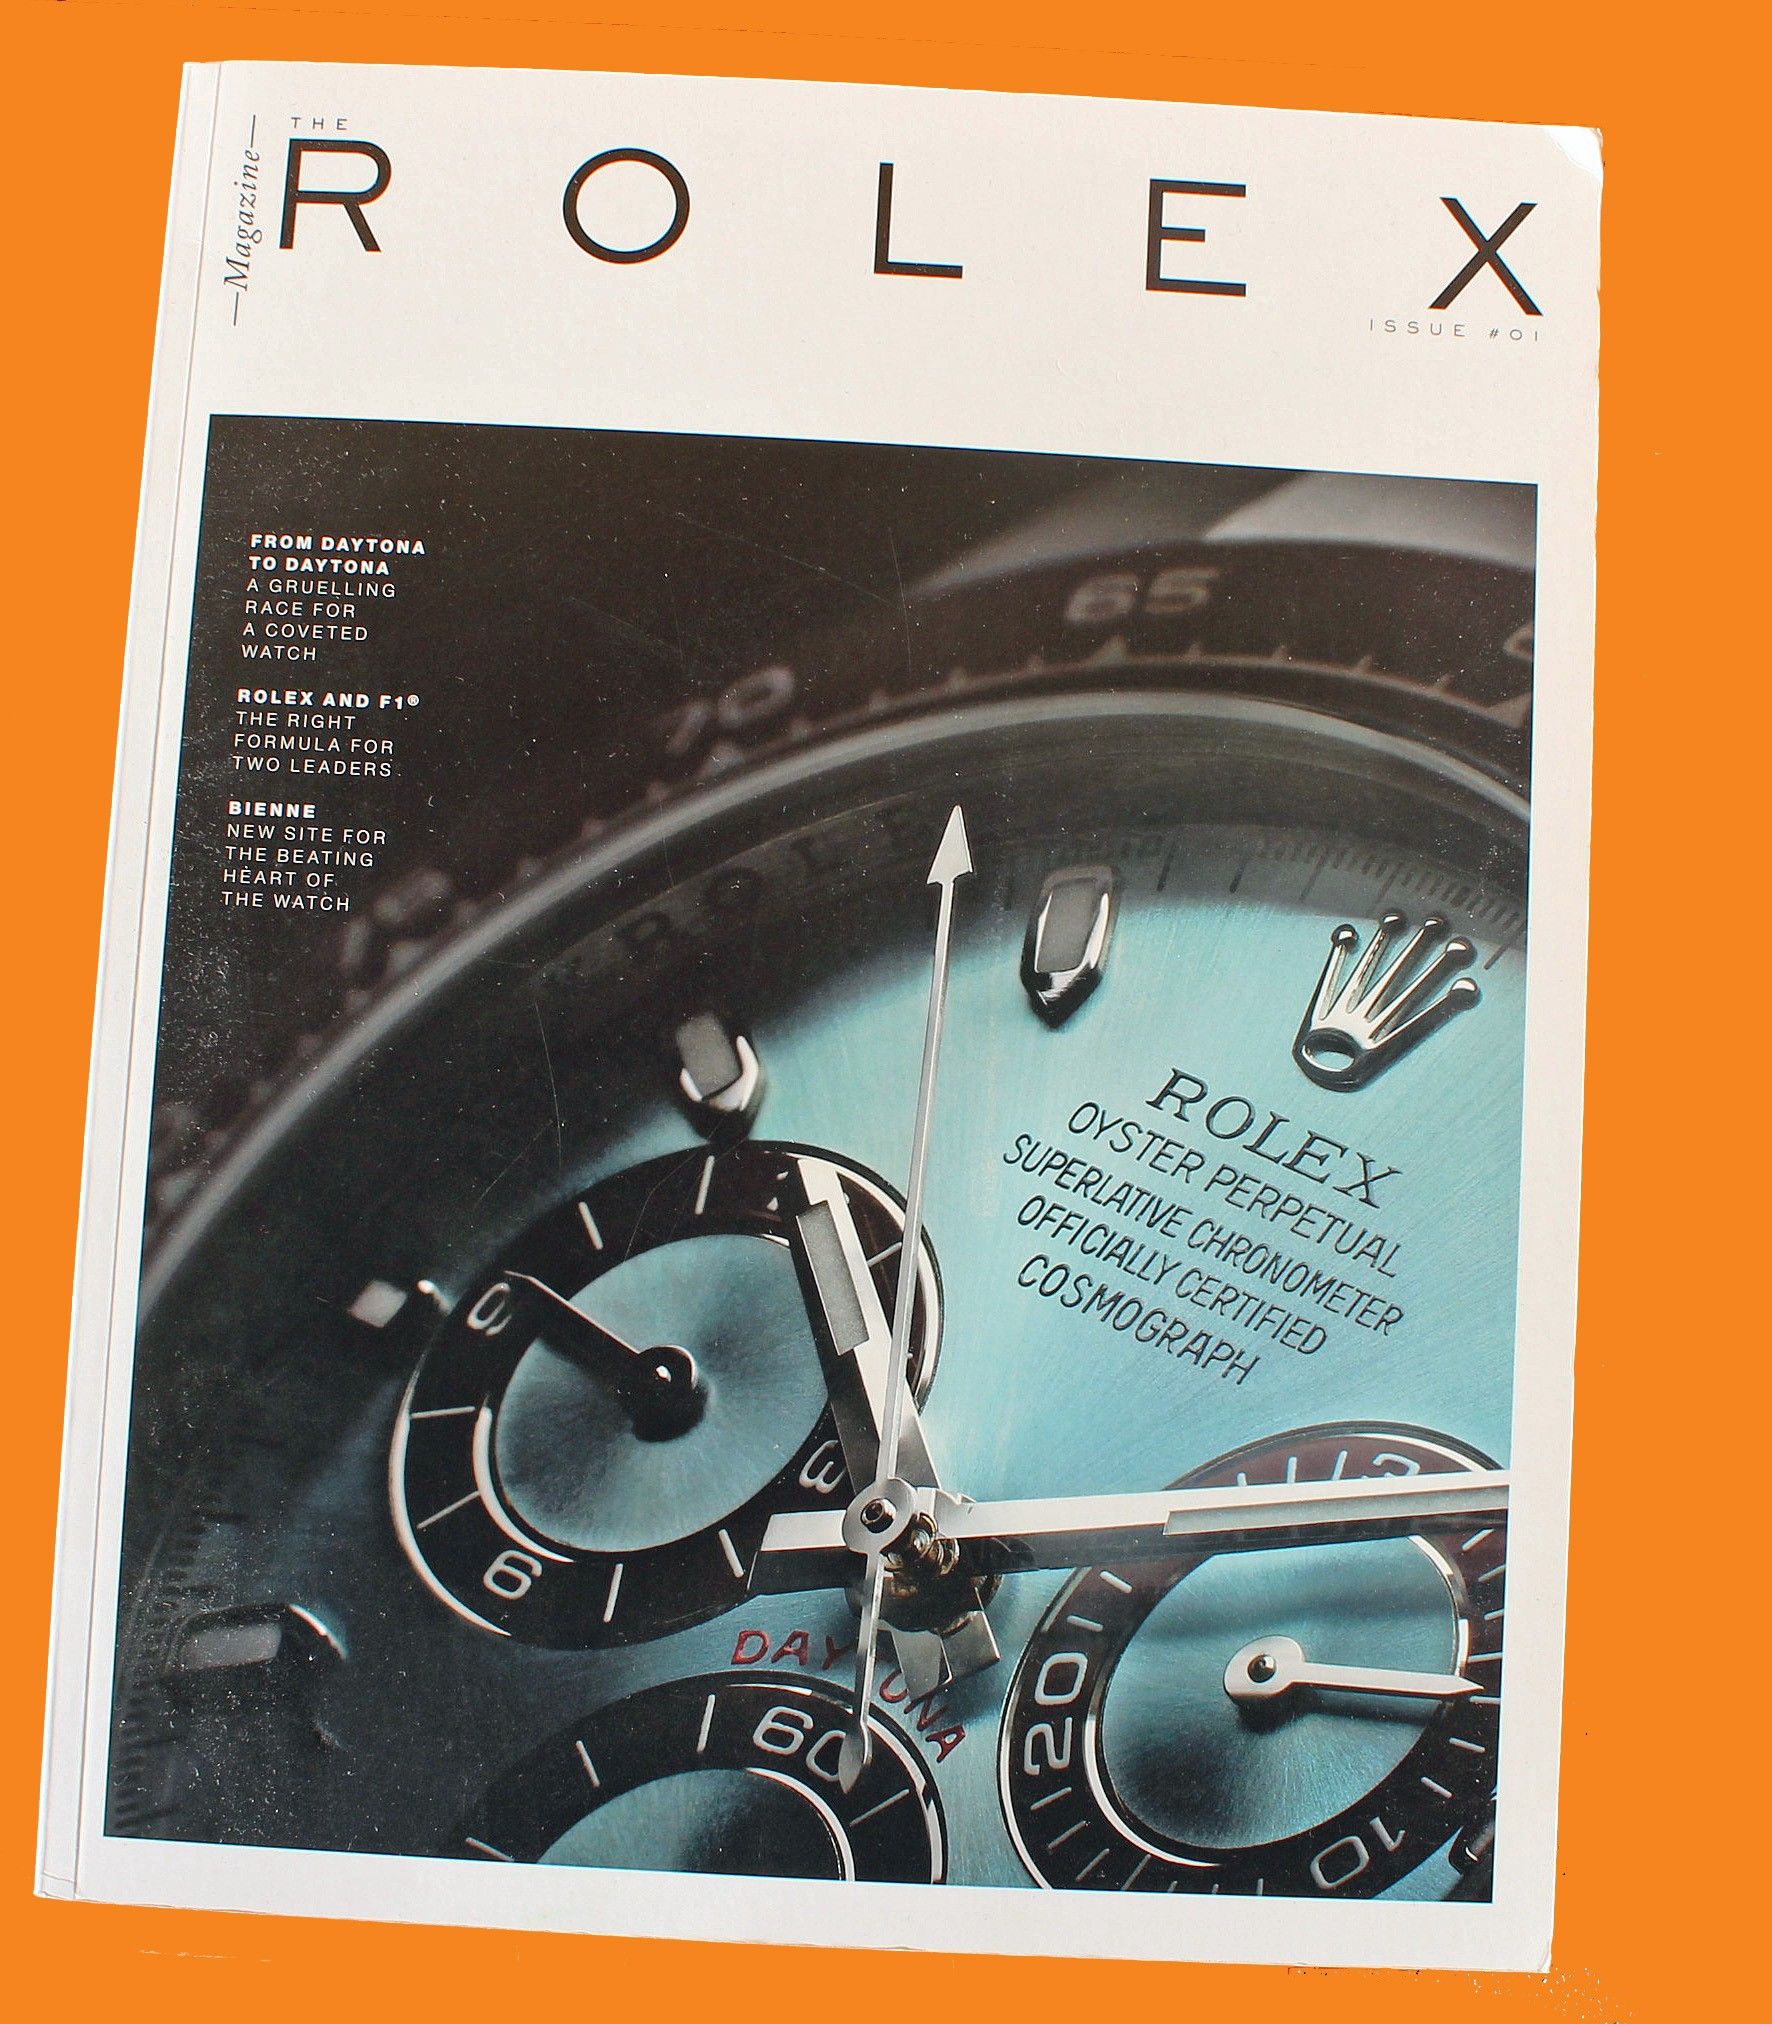 THE ROLEX MAGAZINE Issue 01 for Watch 